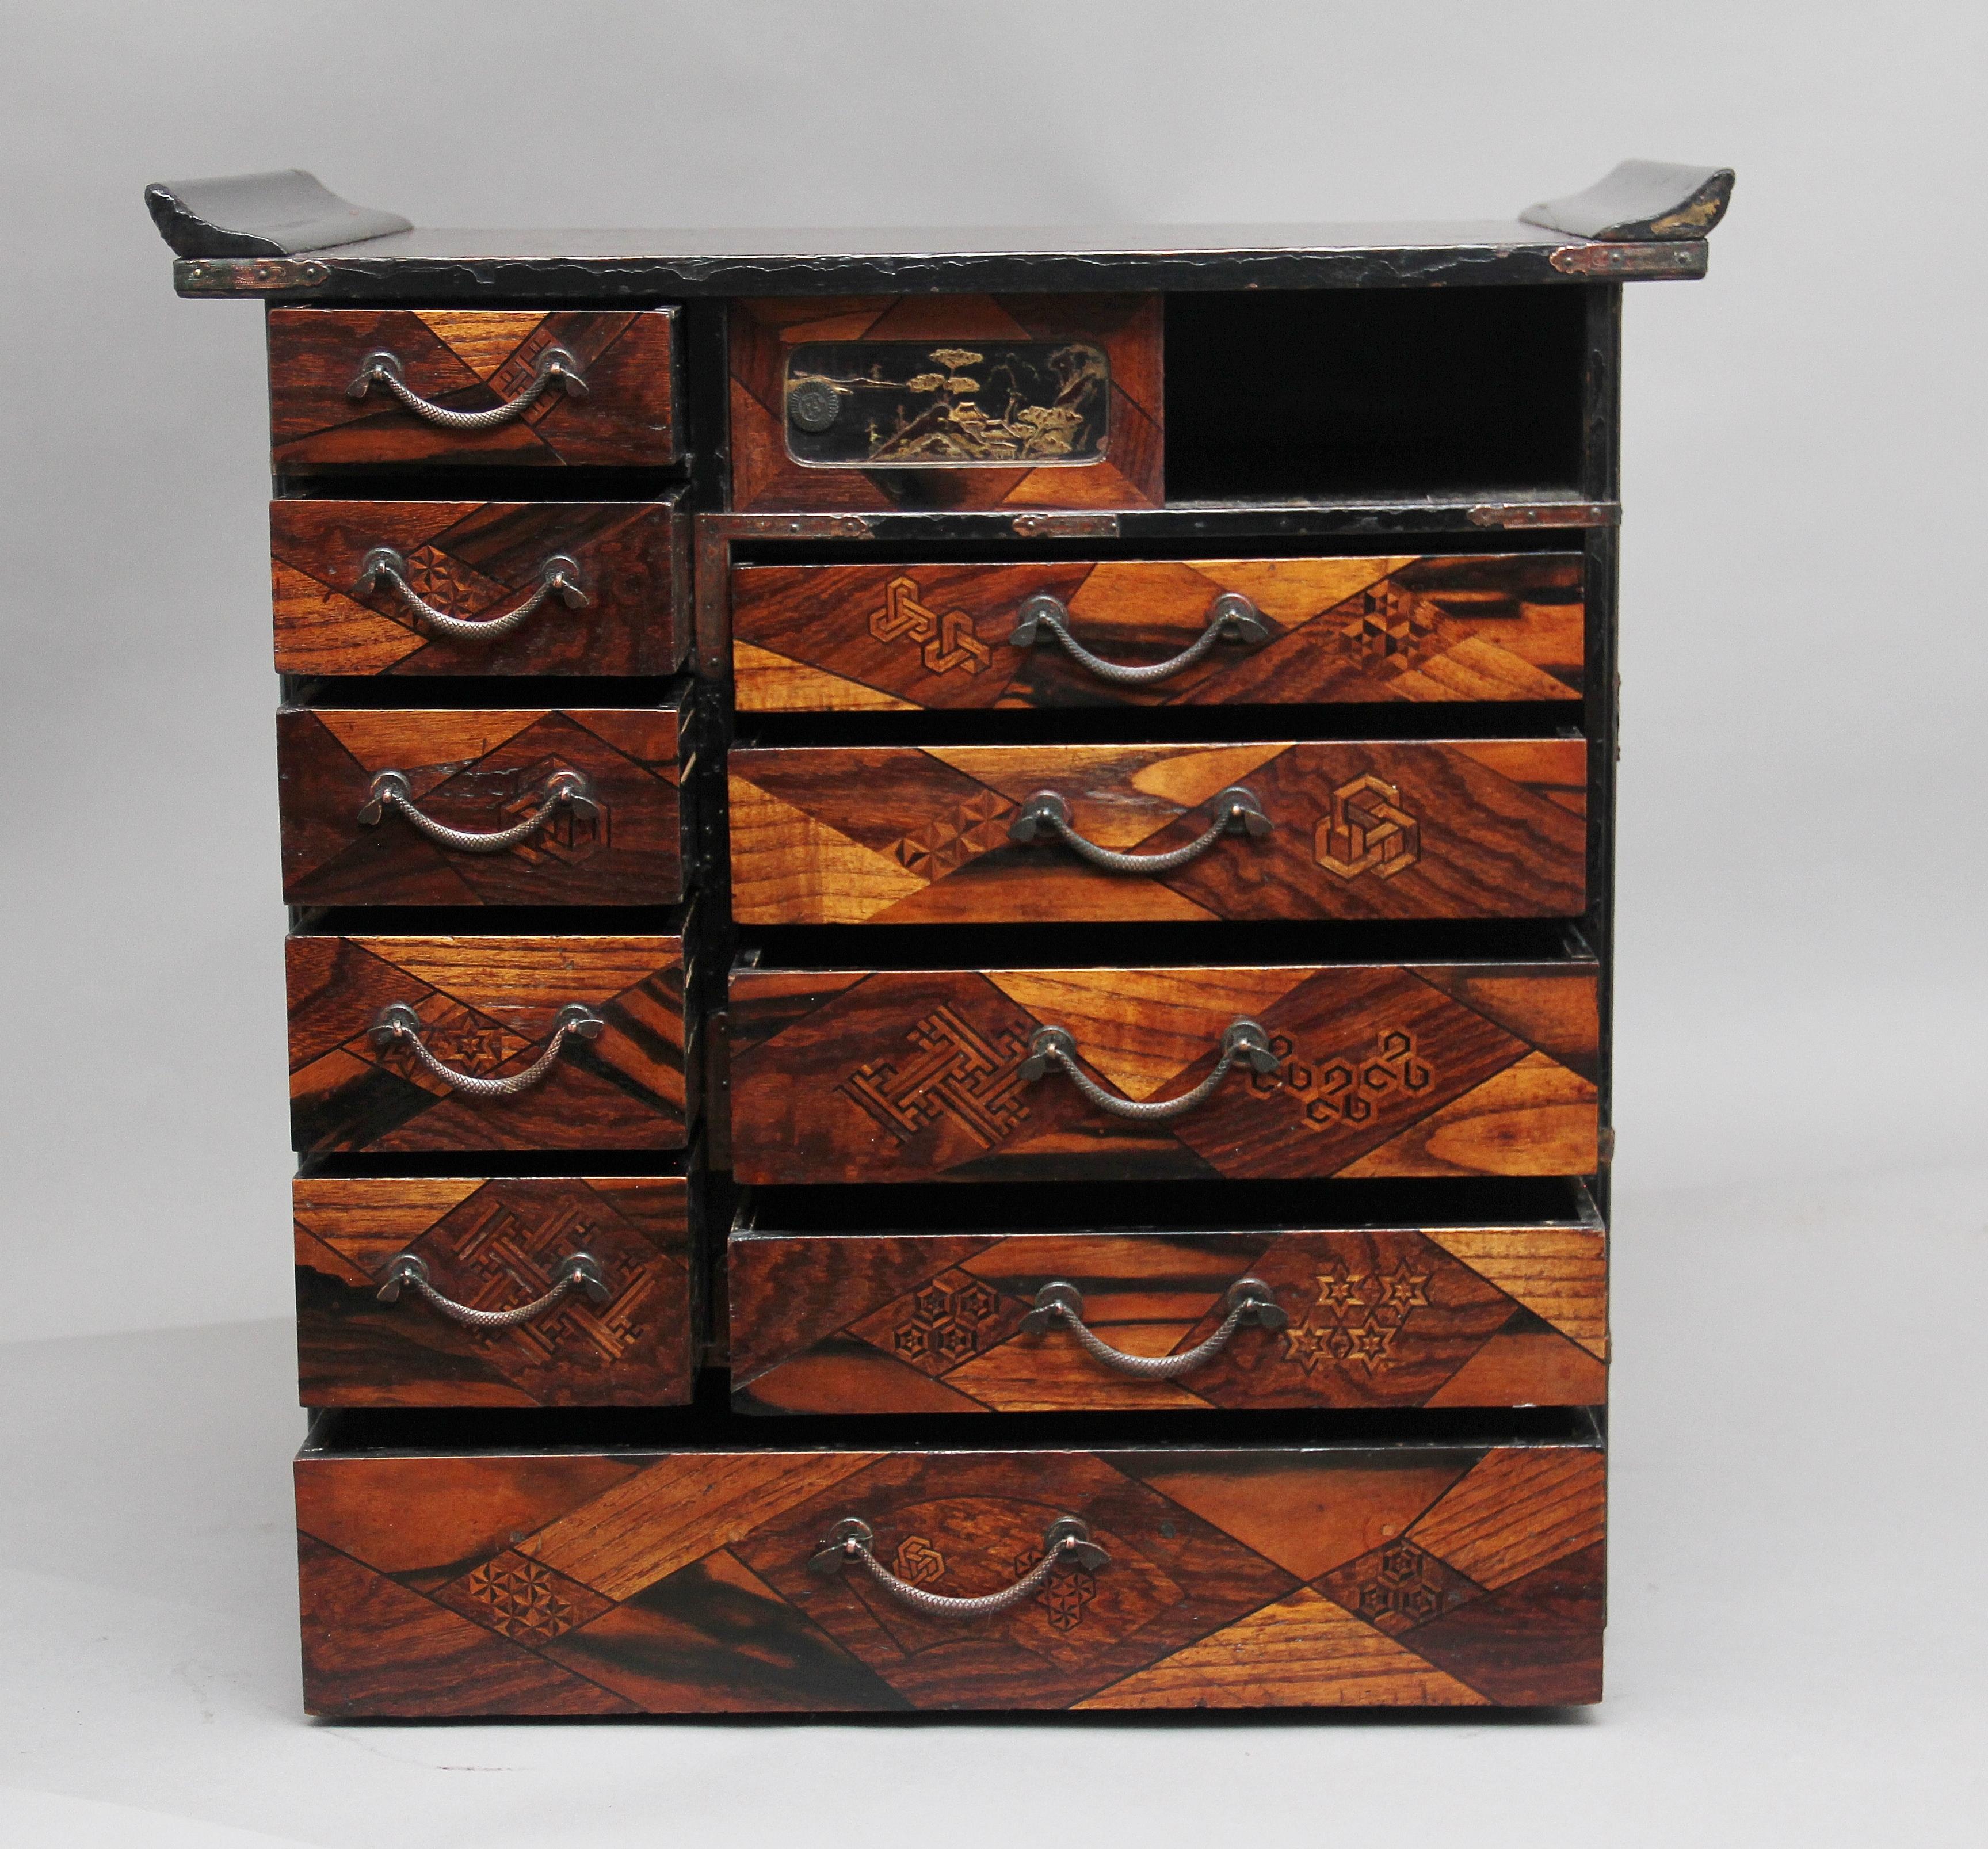 British 19th Century Japanese Parquetry and Lacquered Cabinet